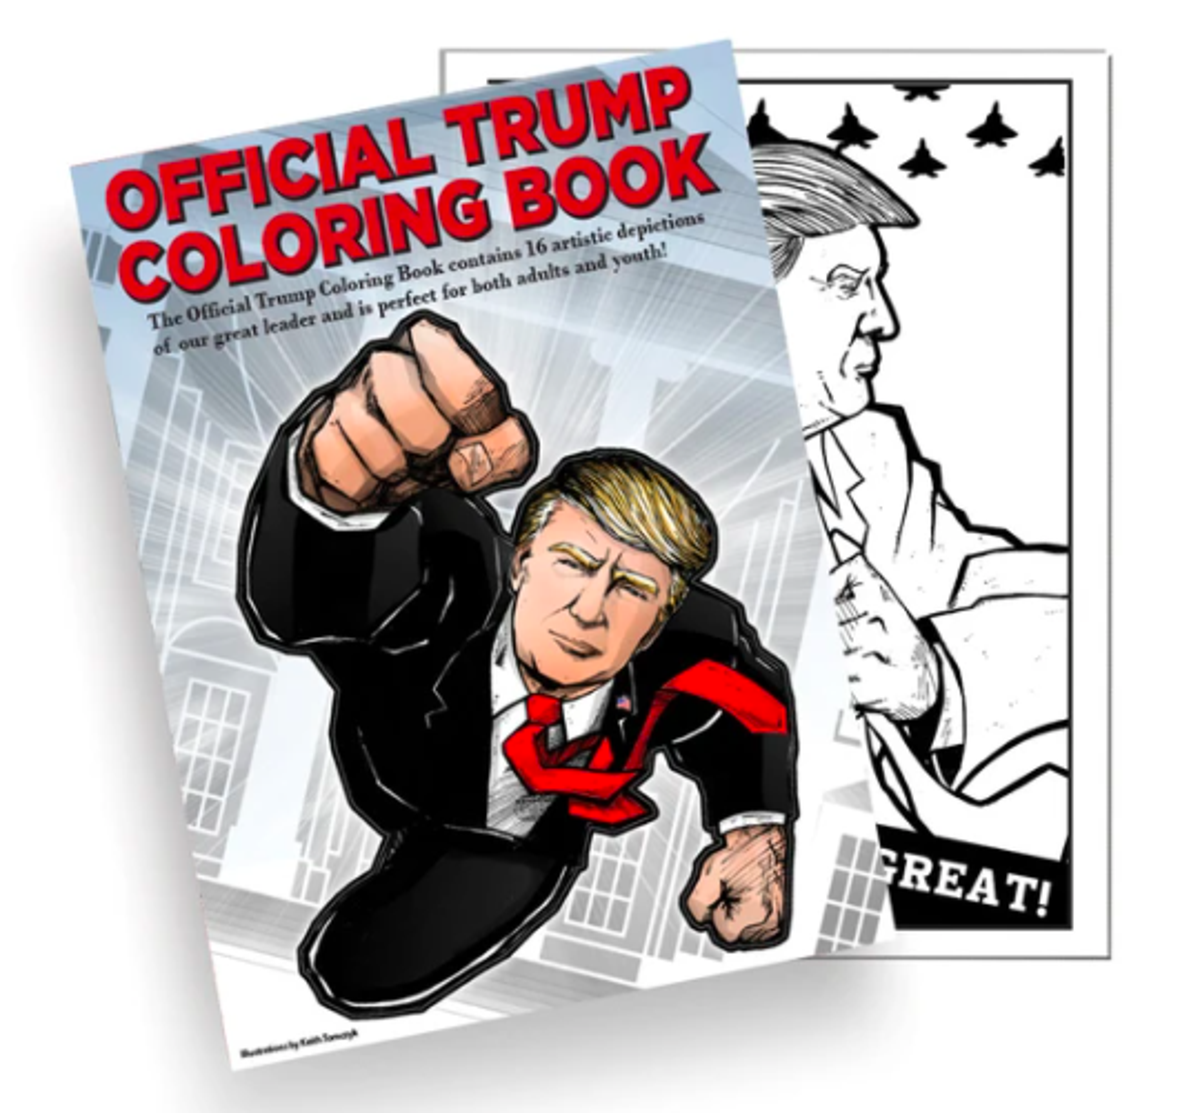 Trump campaign sends text to sell voters his colouring book as US